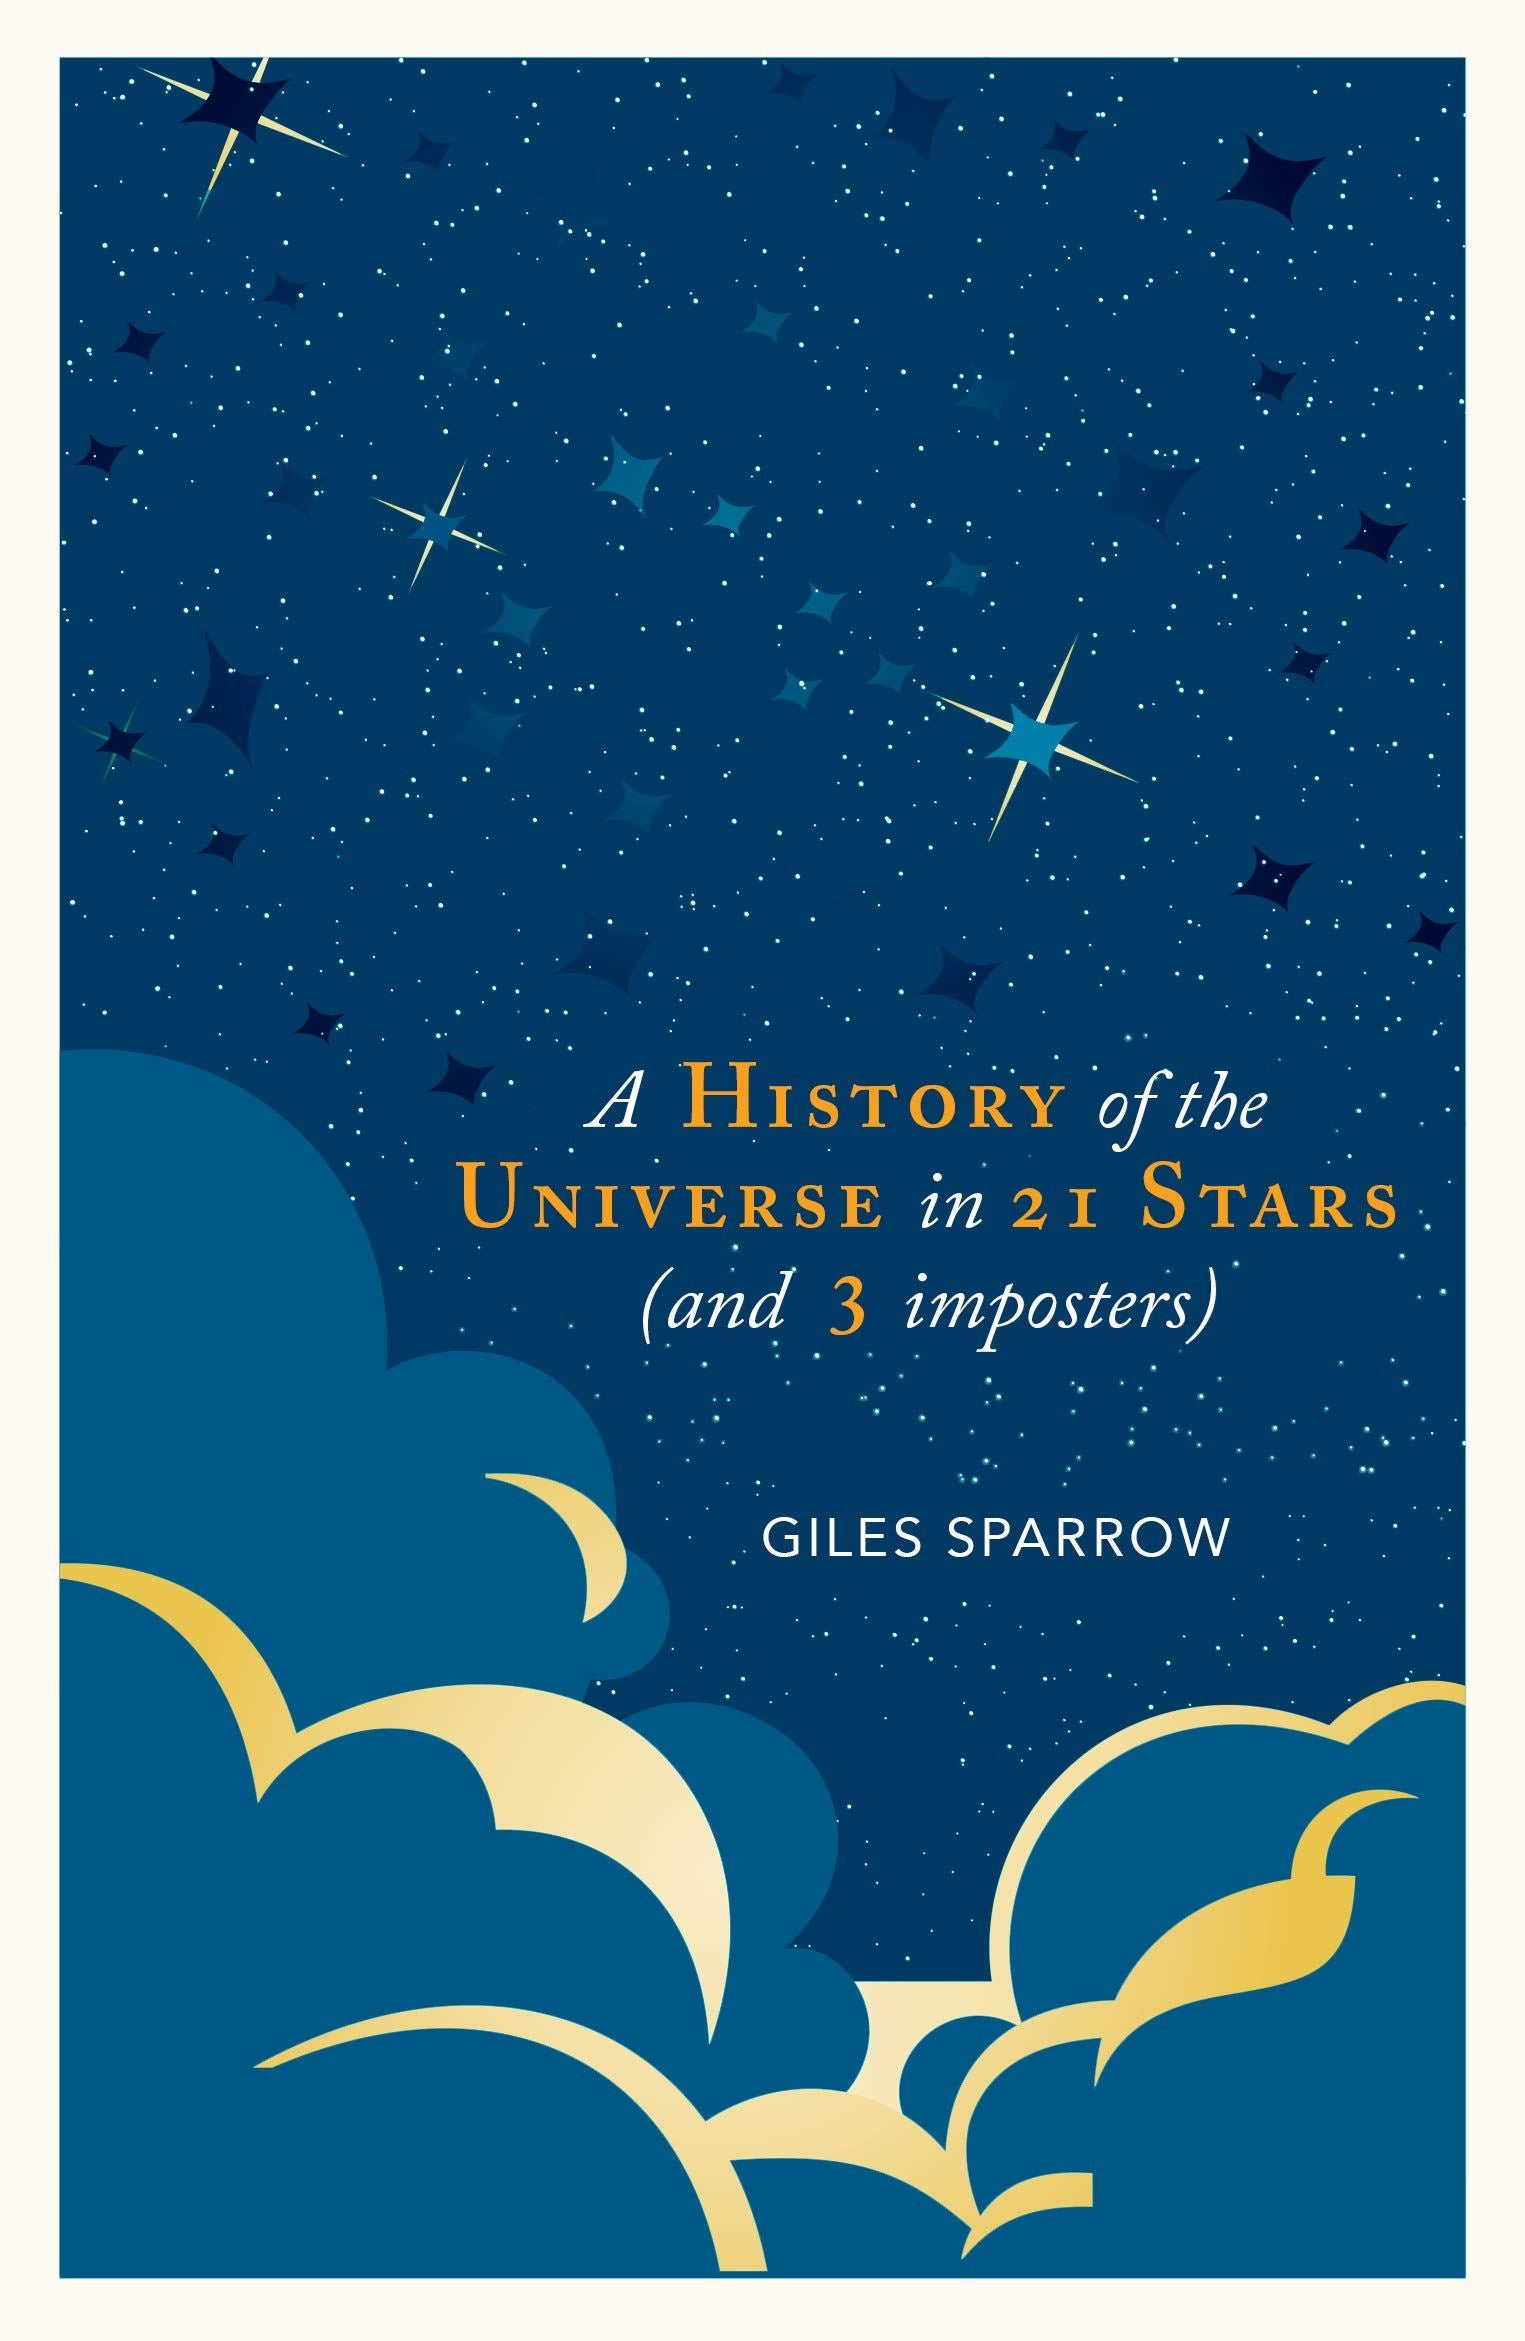 A History of the Universe in 21 Stars by Giles Sparrow